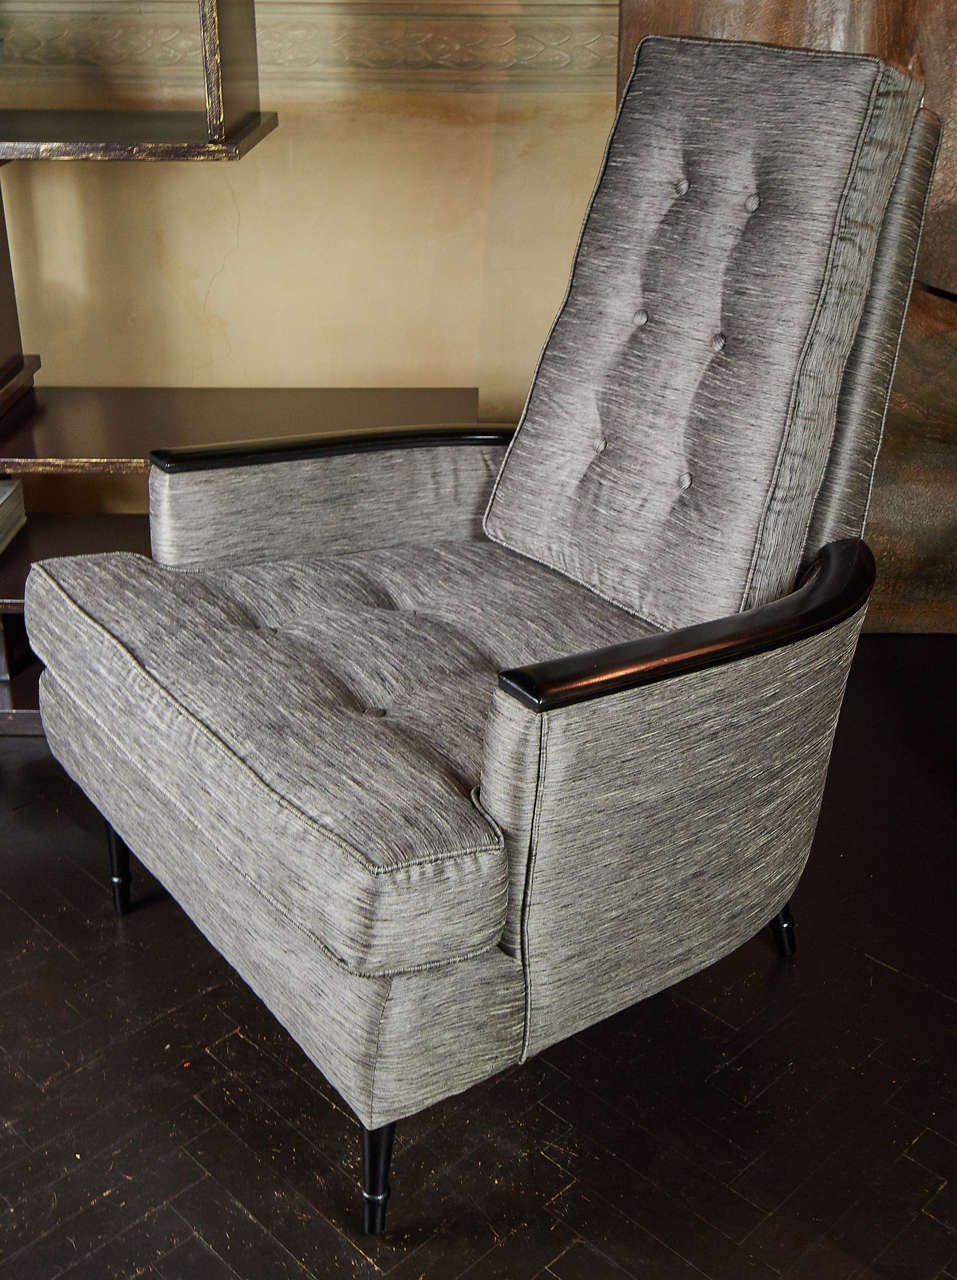 High back armchairs newly reupholstered in grey silk shantung, ebonized wood details.